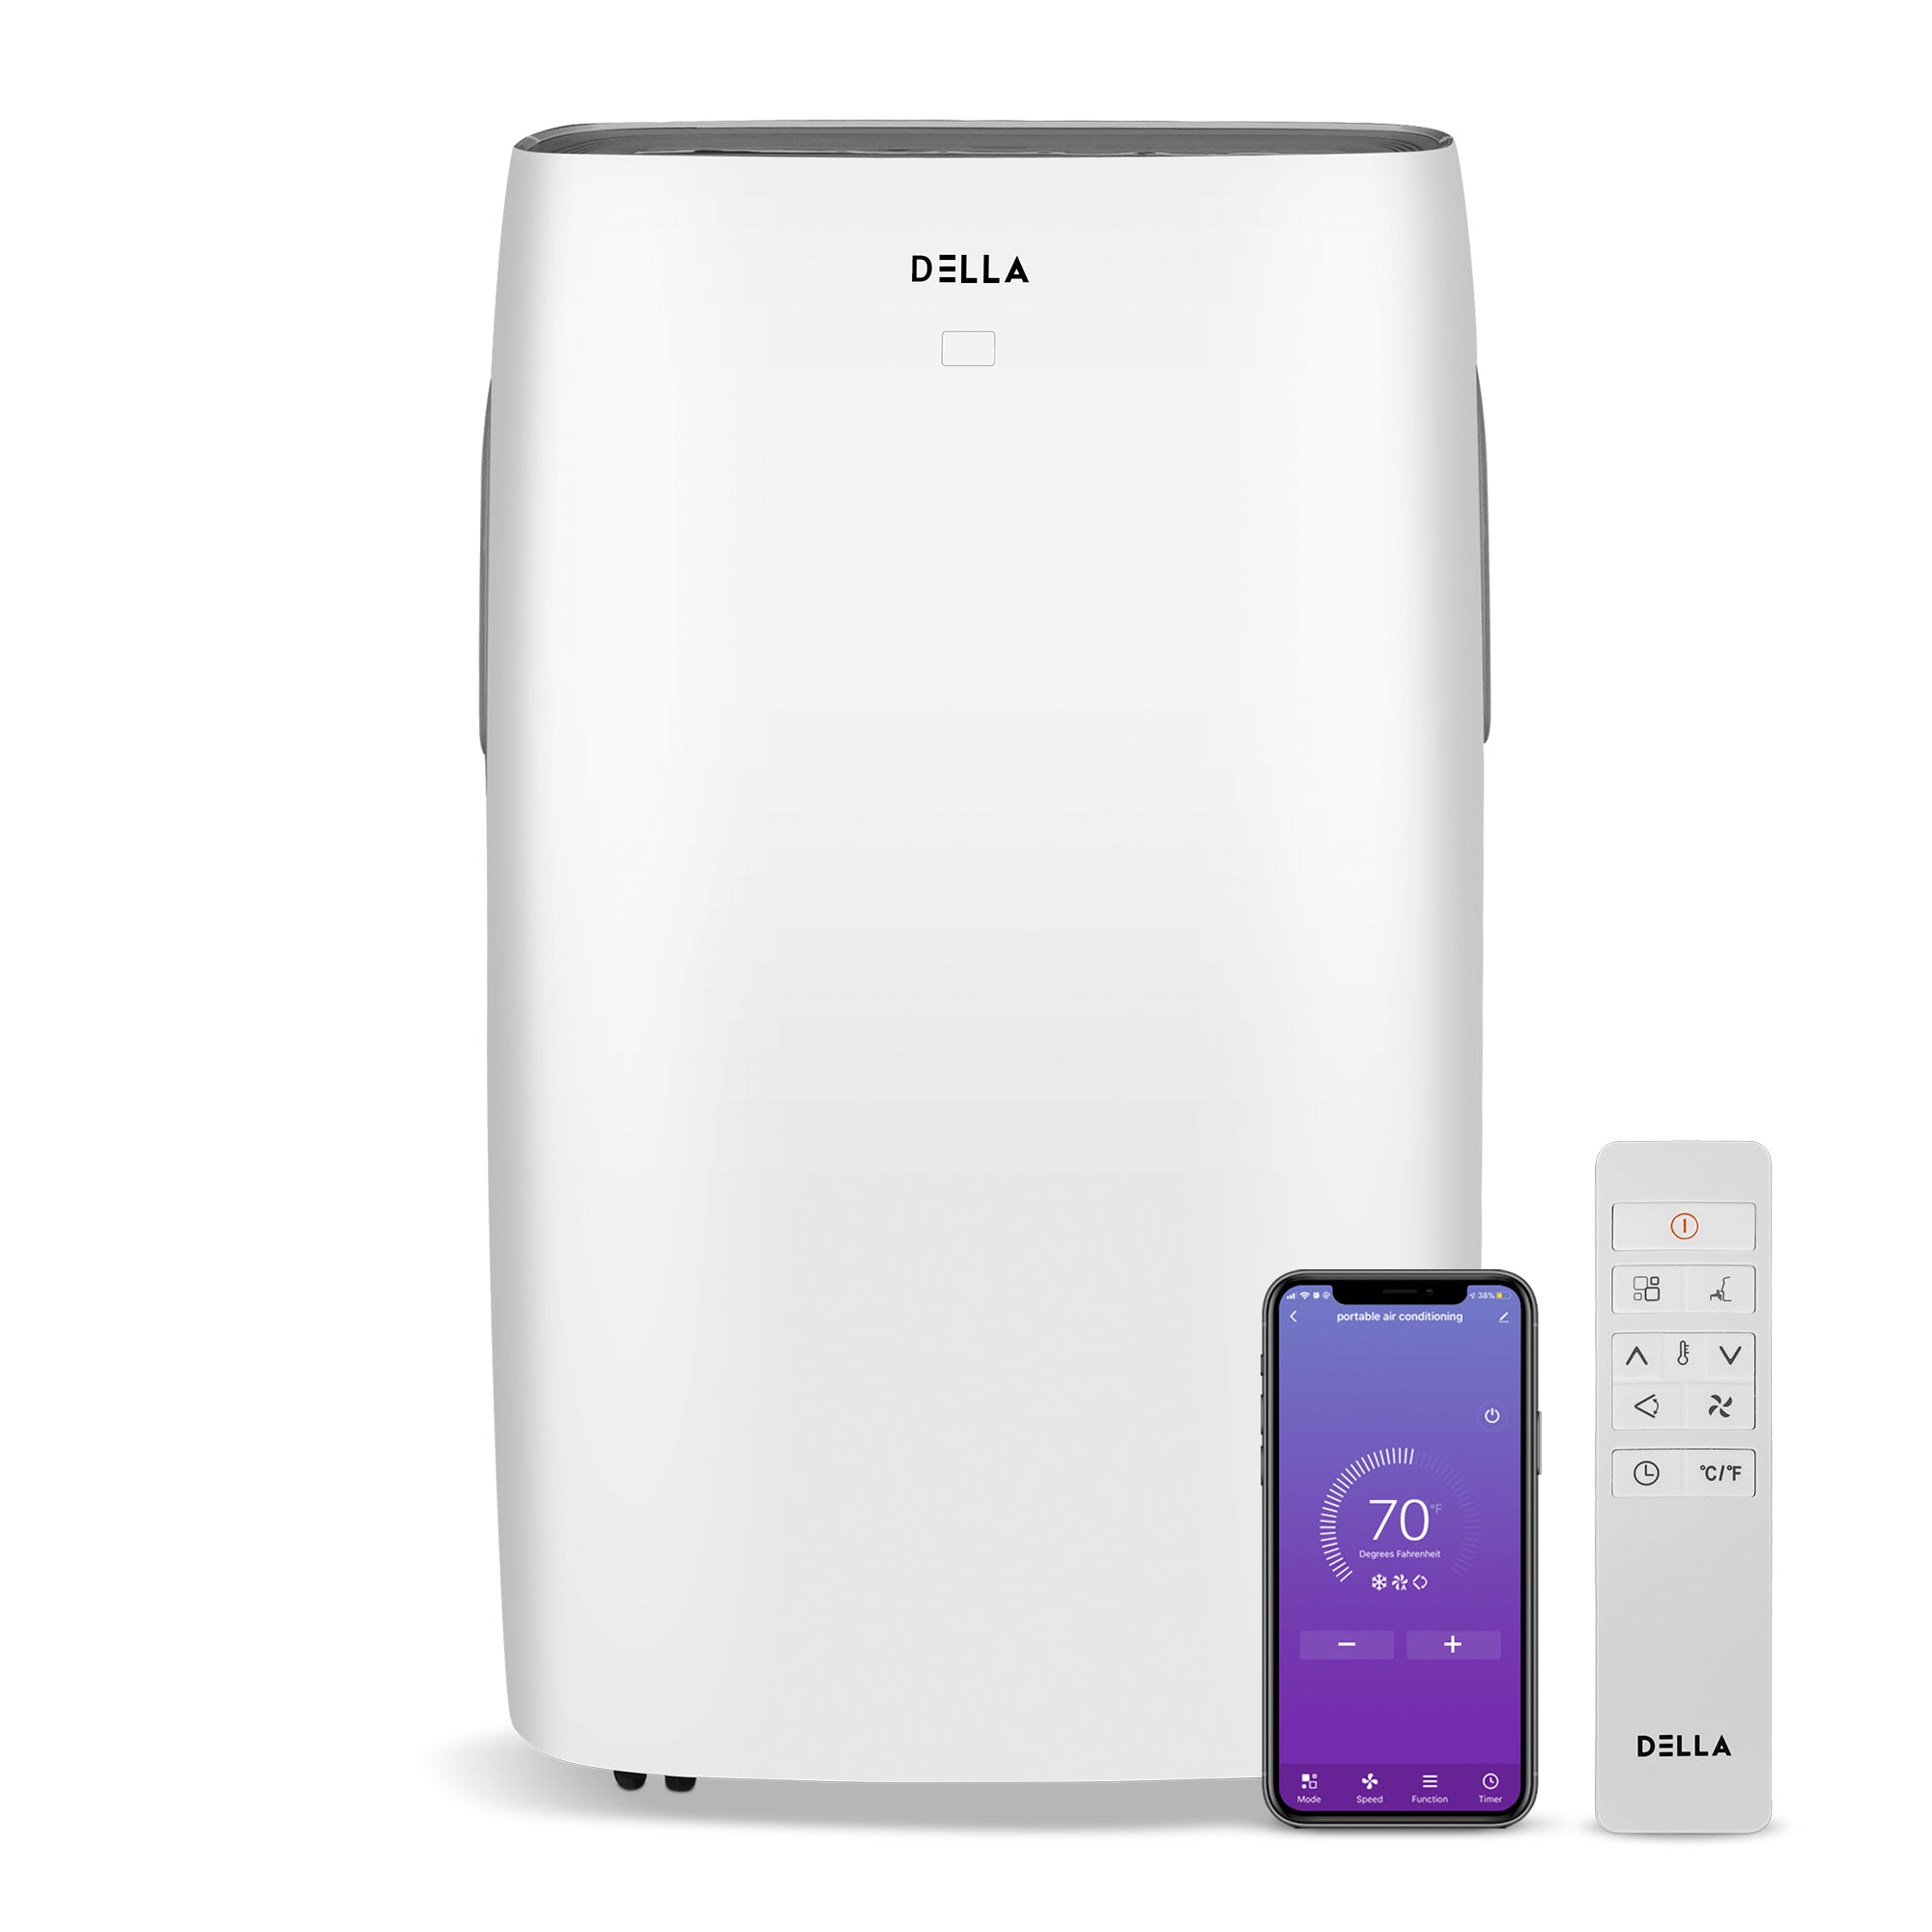 14000 BTU Portable Air Conditioner with App and WiFi Control-White